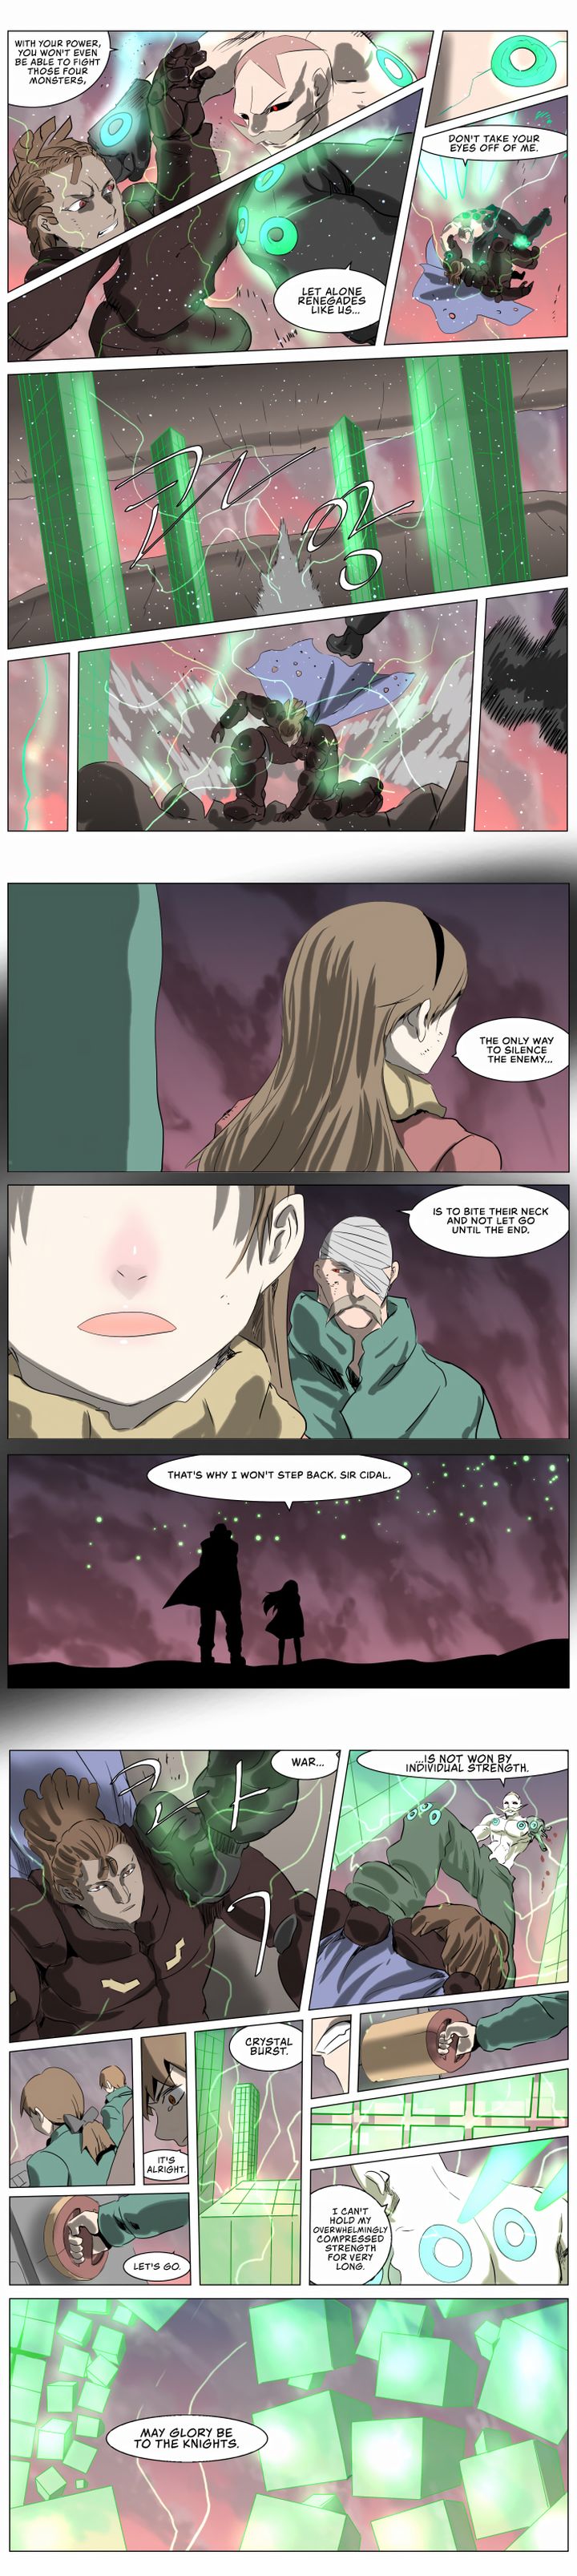 Knight Run Chapter 231 Page 2